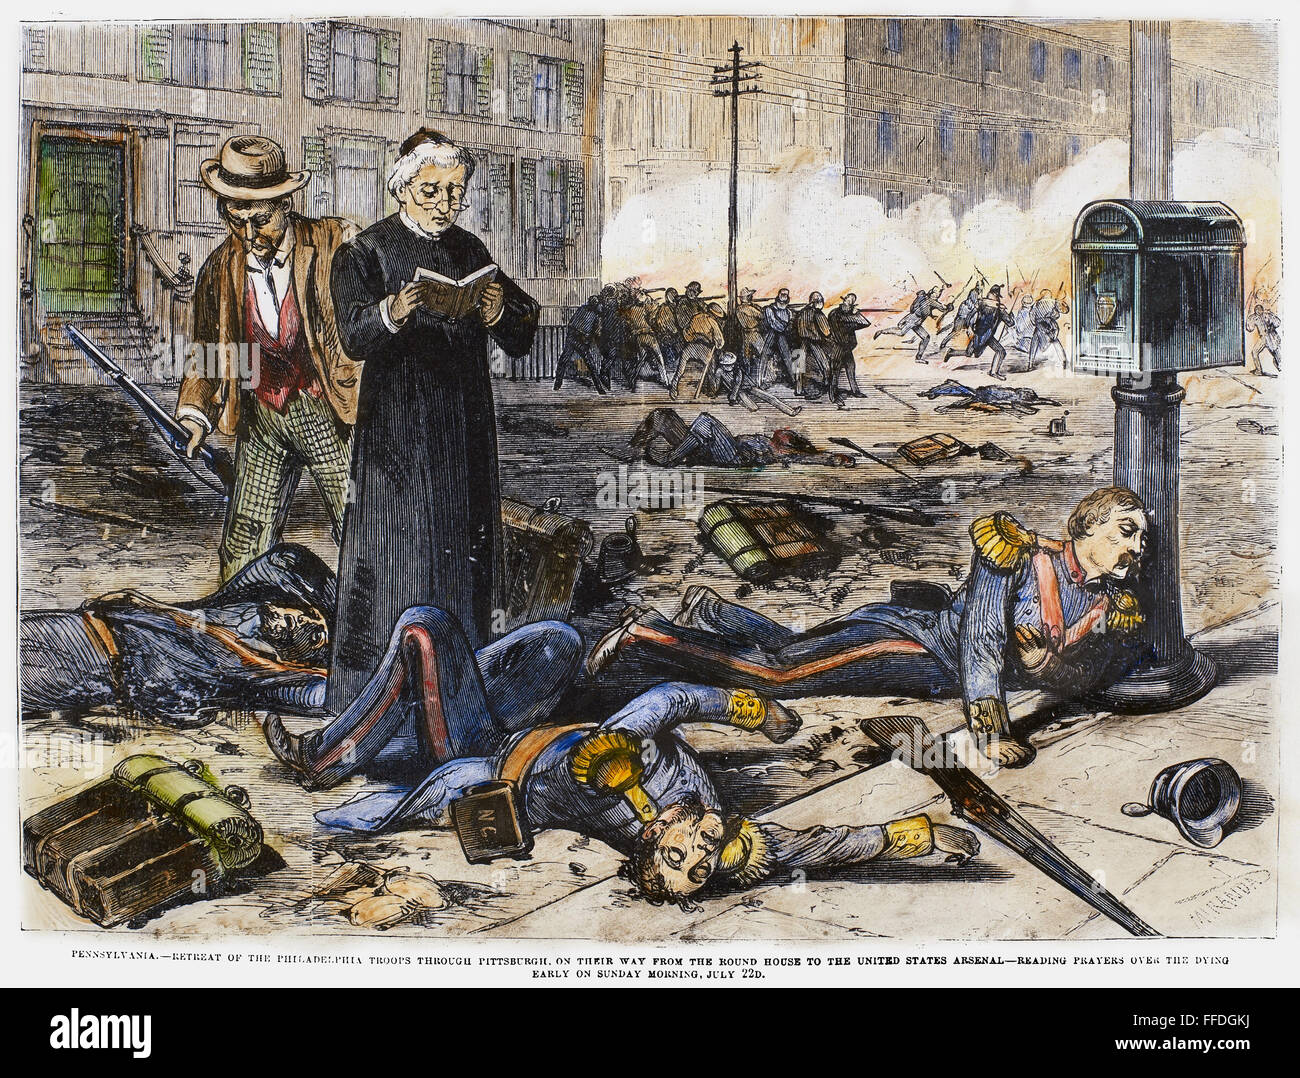 GREAT RAILROAD STRIKE, 1877. /nA priest reads prayers over dying militiamen as the troops retreat through Pittsburgh, Pennsylvania, during the Great Railroad Strike, 22 July 1877. Contemporary American wood engraving. Stock Photo